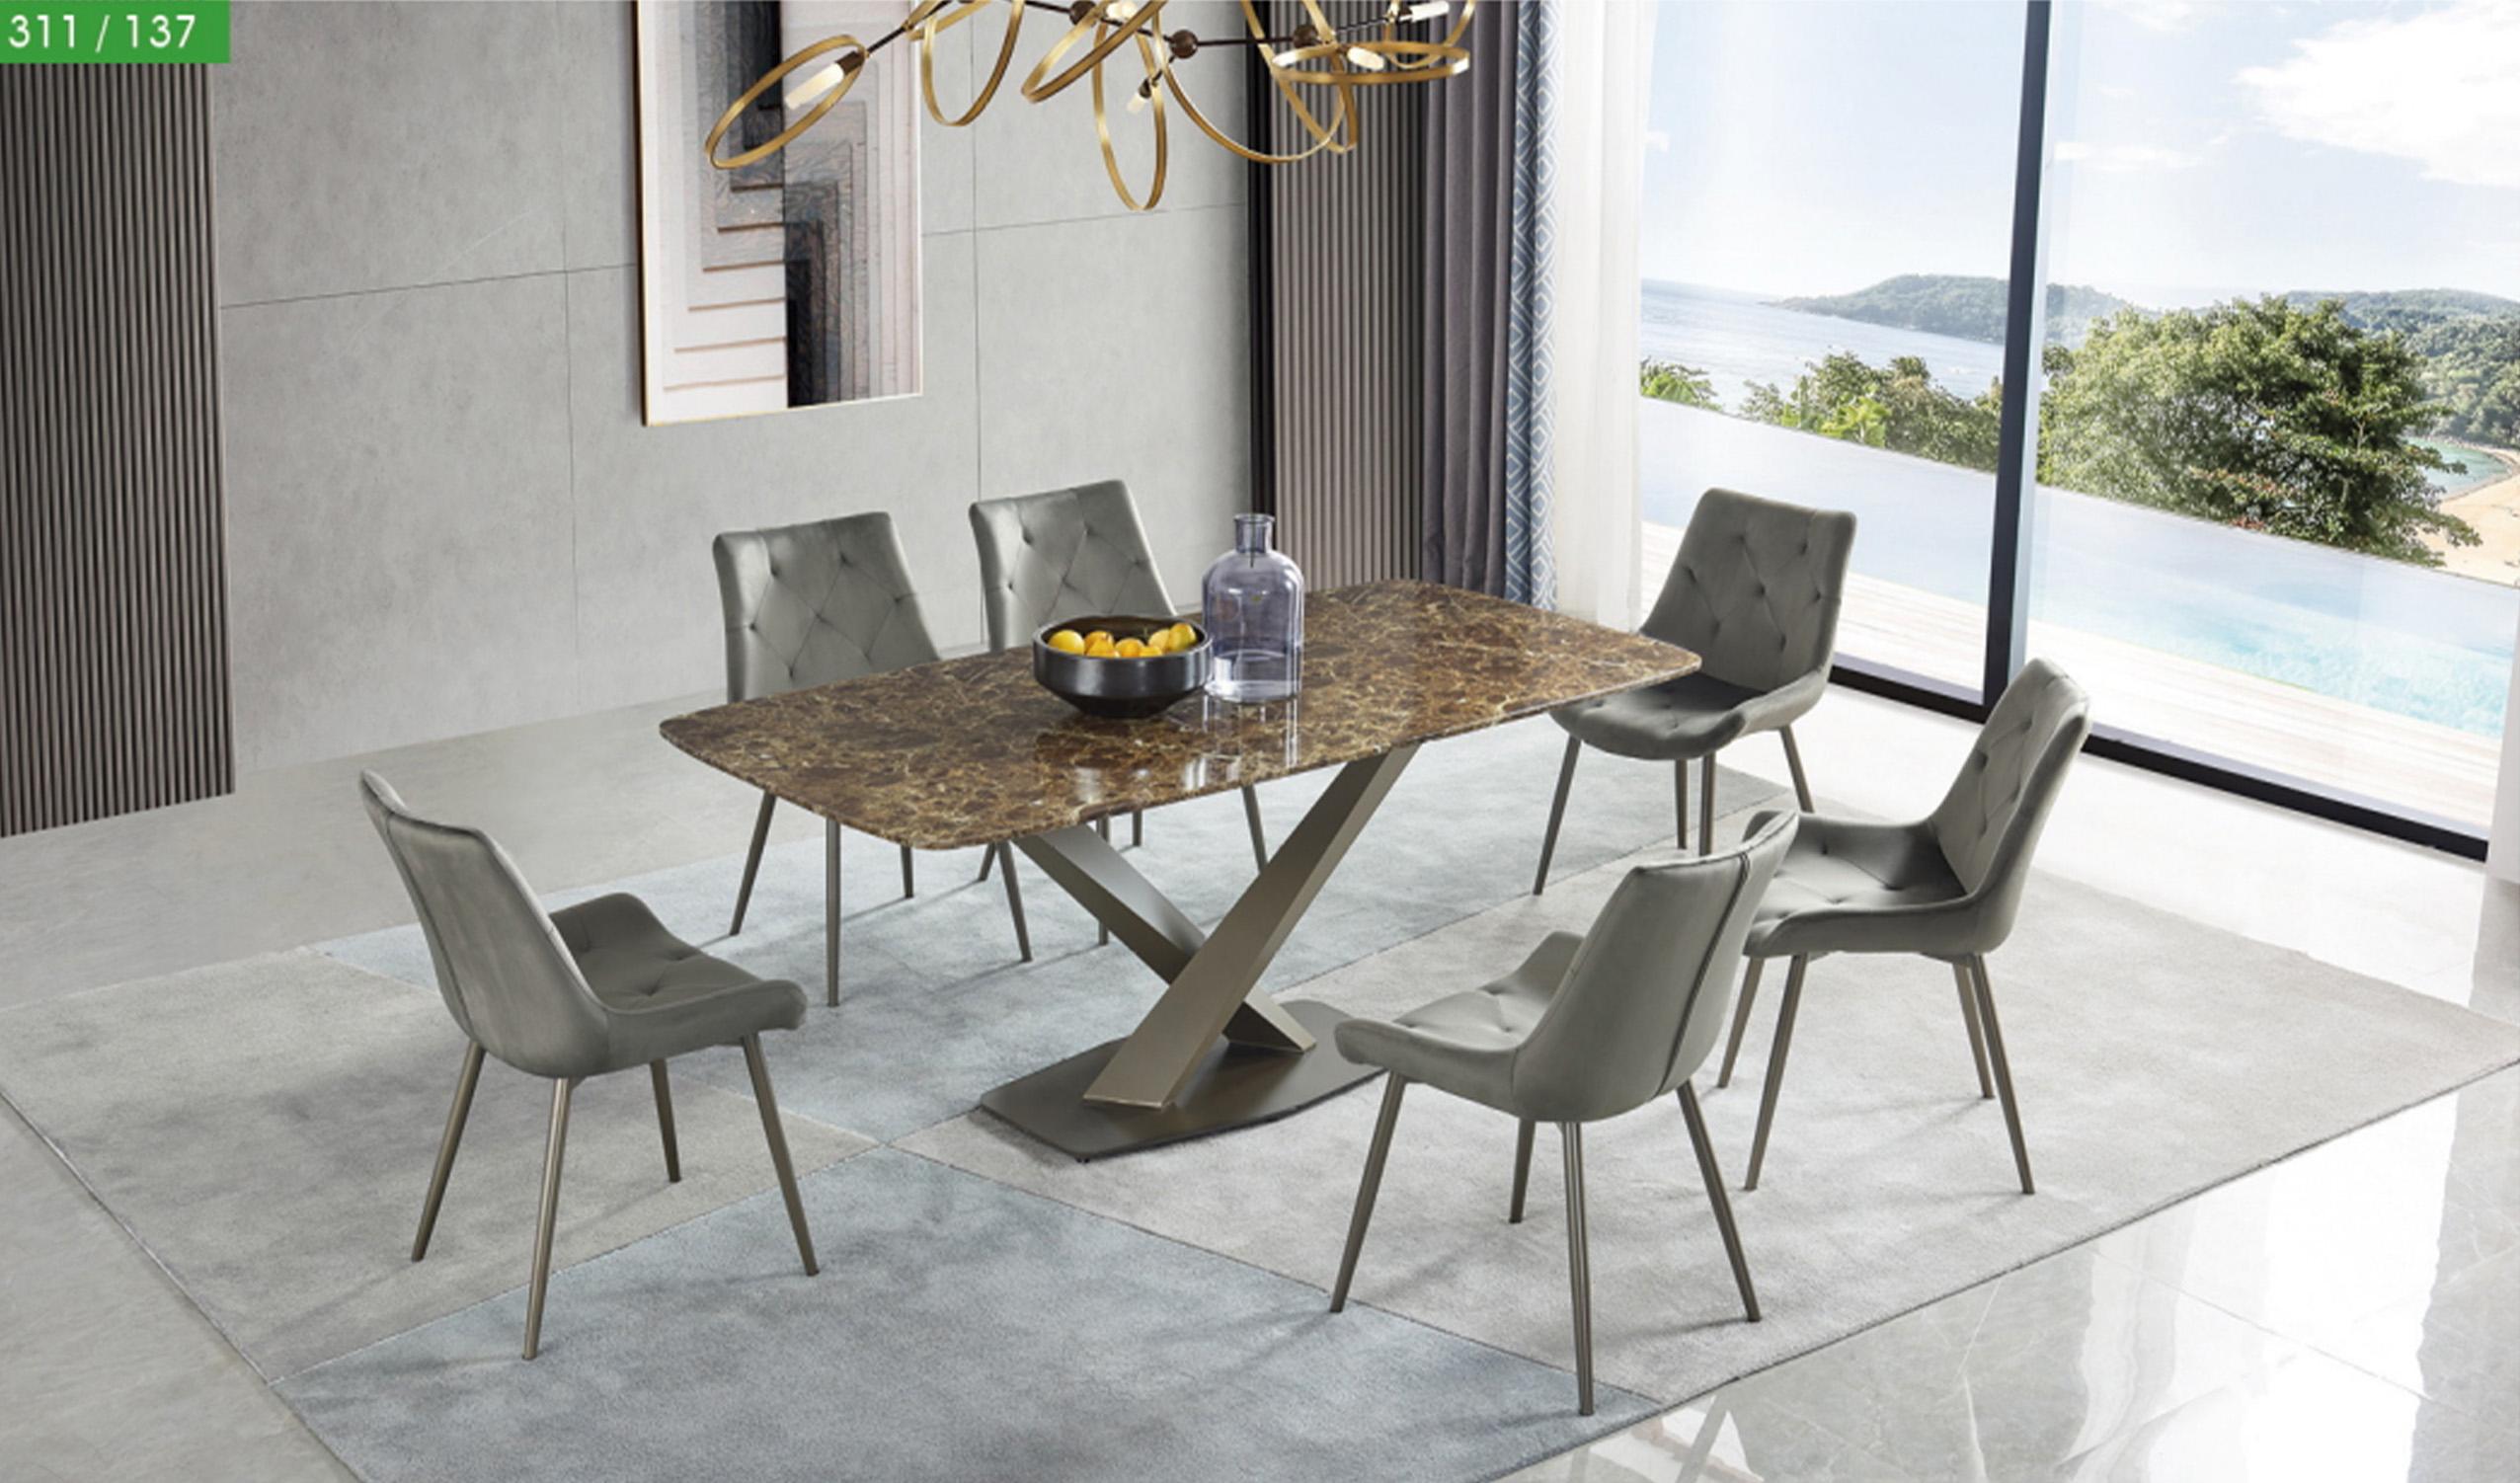 Contemporary Dining Table Set 311DININGTABLE 311DININGTABLE-7PC in Golden Brown Microfiber